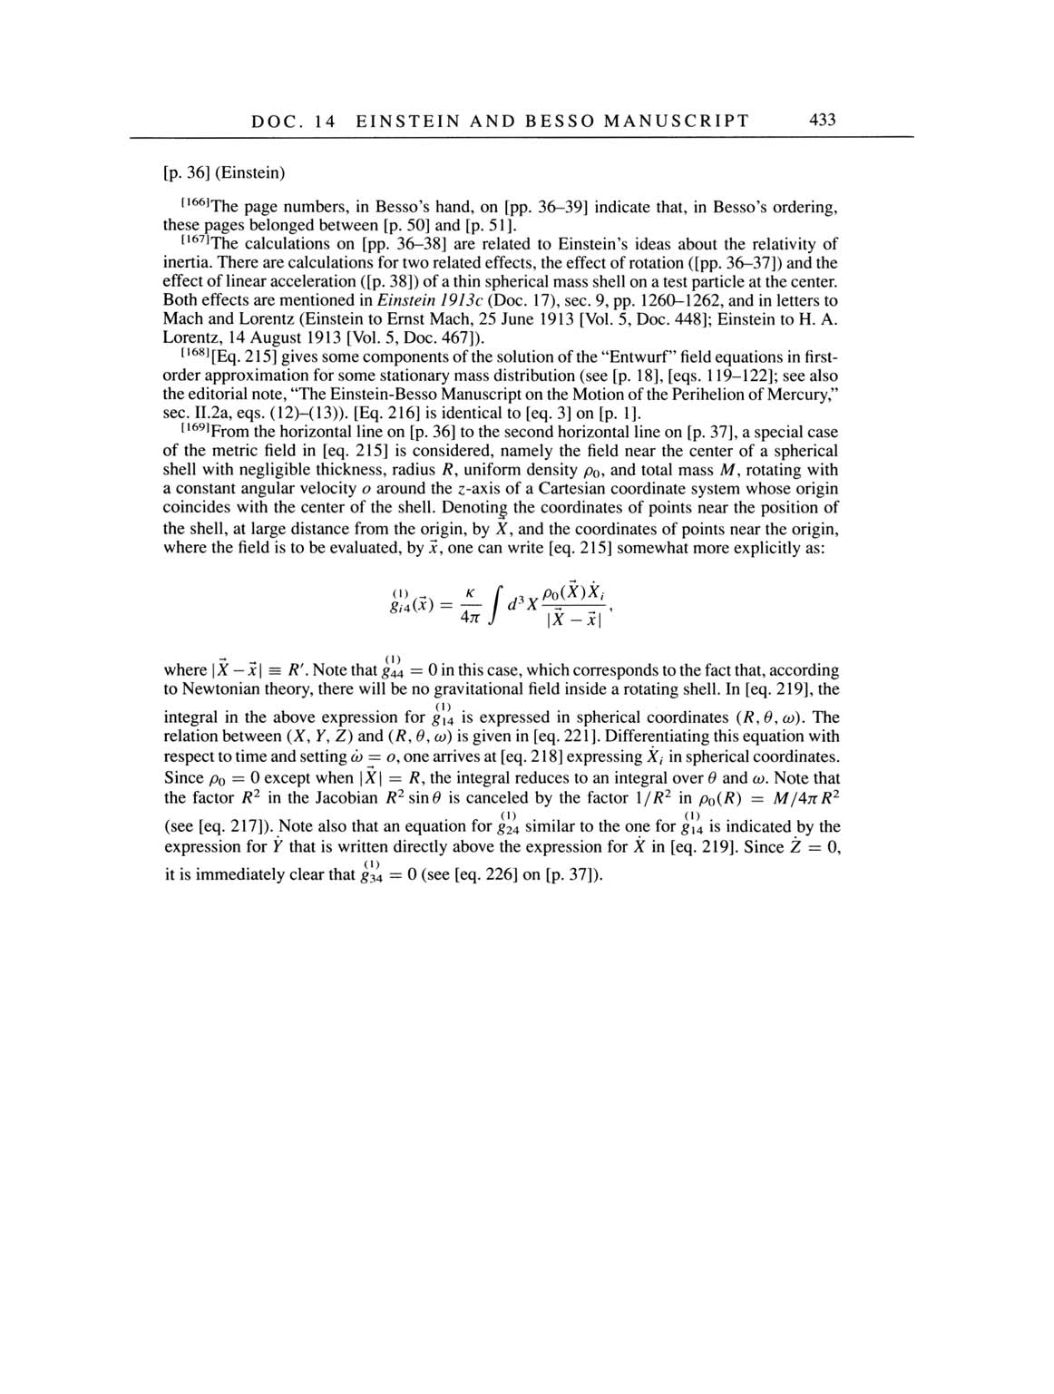 Volume 4: The Swiss Years: Writings 1912-1914 page 433